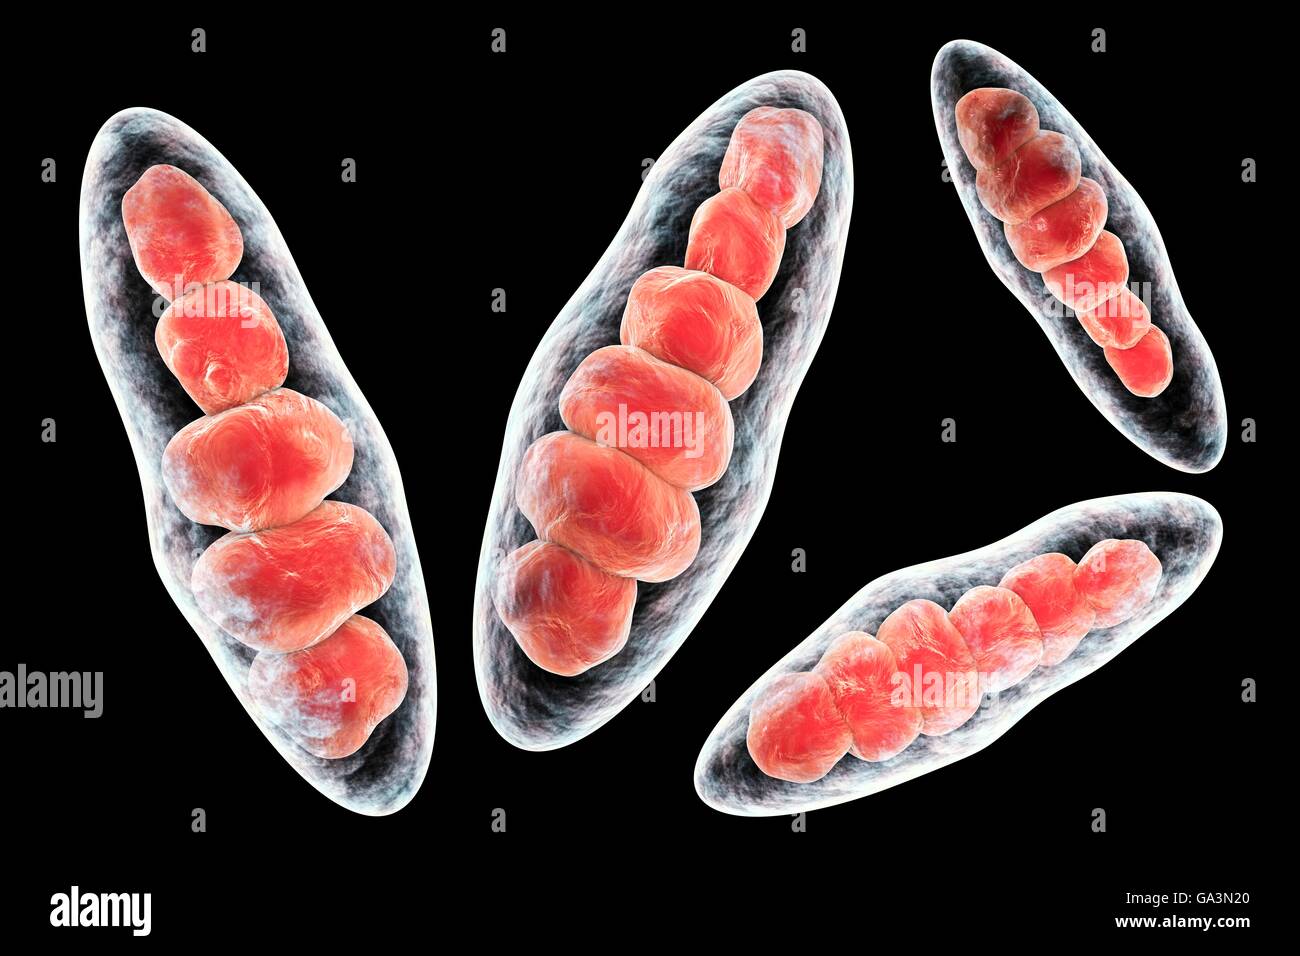 Computer illustration of Trichophyton mentagrophytes, the cause of athlete's foot (tinea pedis) and scalp ringworm (tinea capitus). Both of these contagious skin infections are spread by the fungus's spores (red). T. mentagrophytes is one of many species of fungi that can grow in human skin, causing inflammation and itching. Athlete's foot and ringworm are treated with antifungal drugs. Seen here are macroconidia (multi-cellular bodies containing spores). Stock Photo